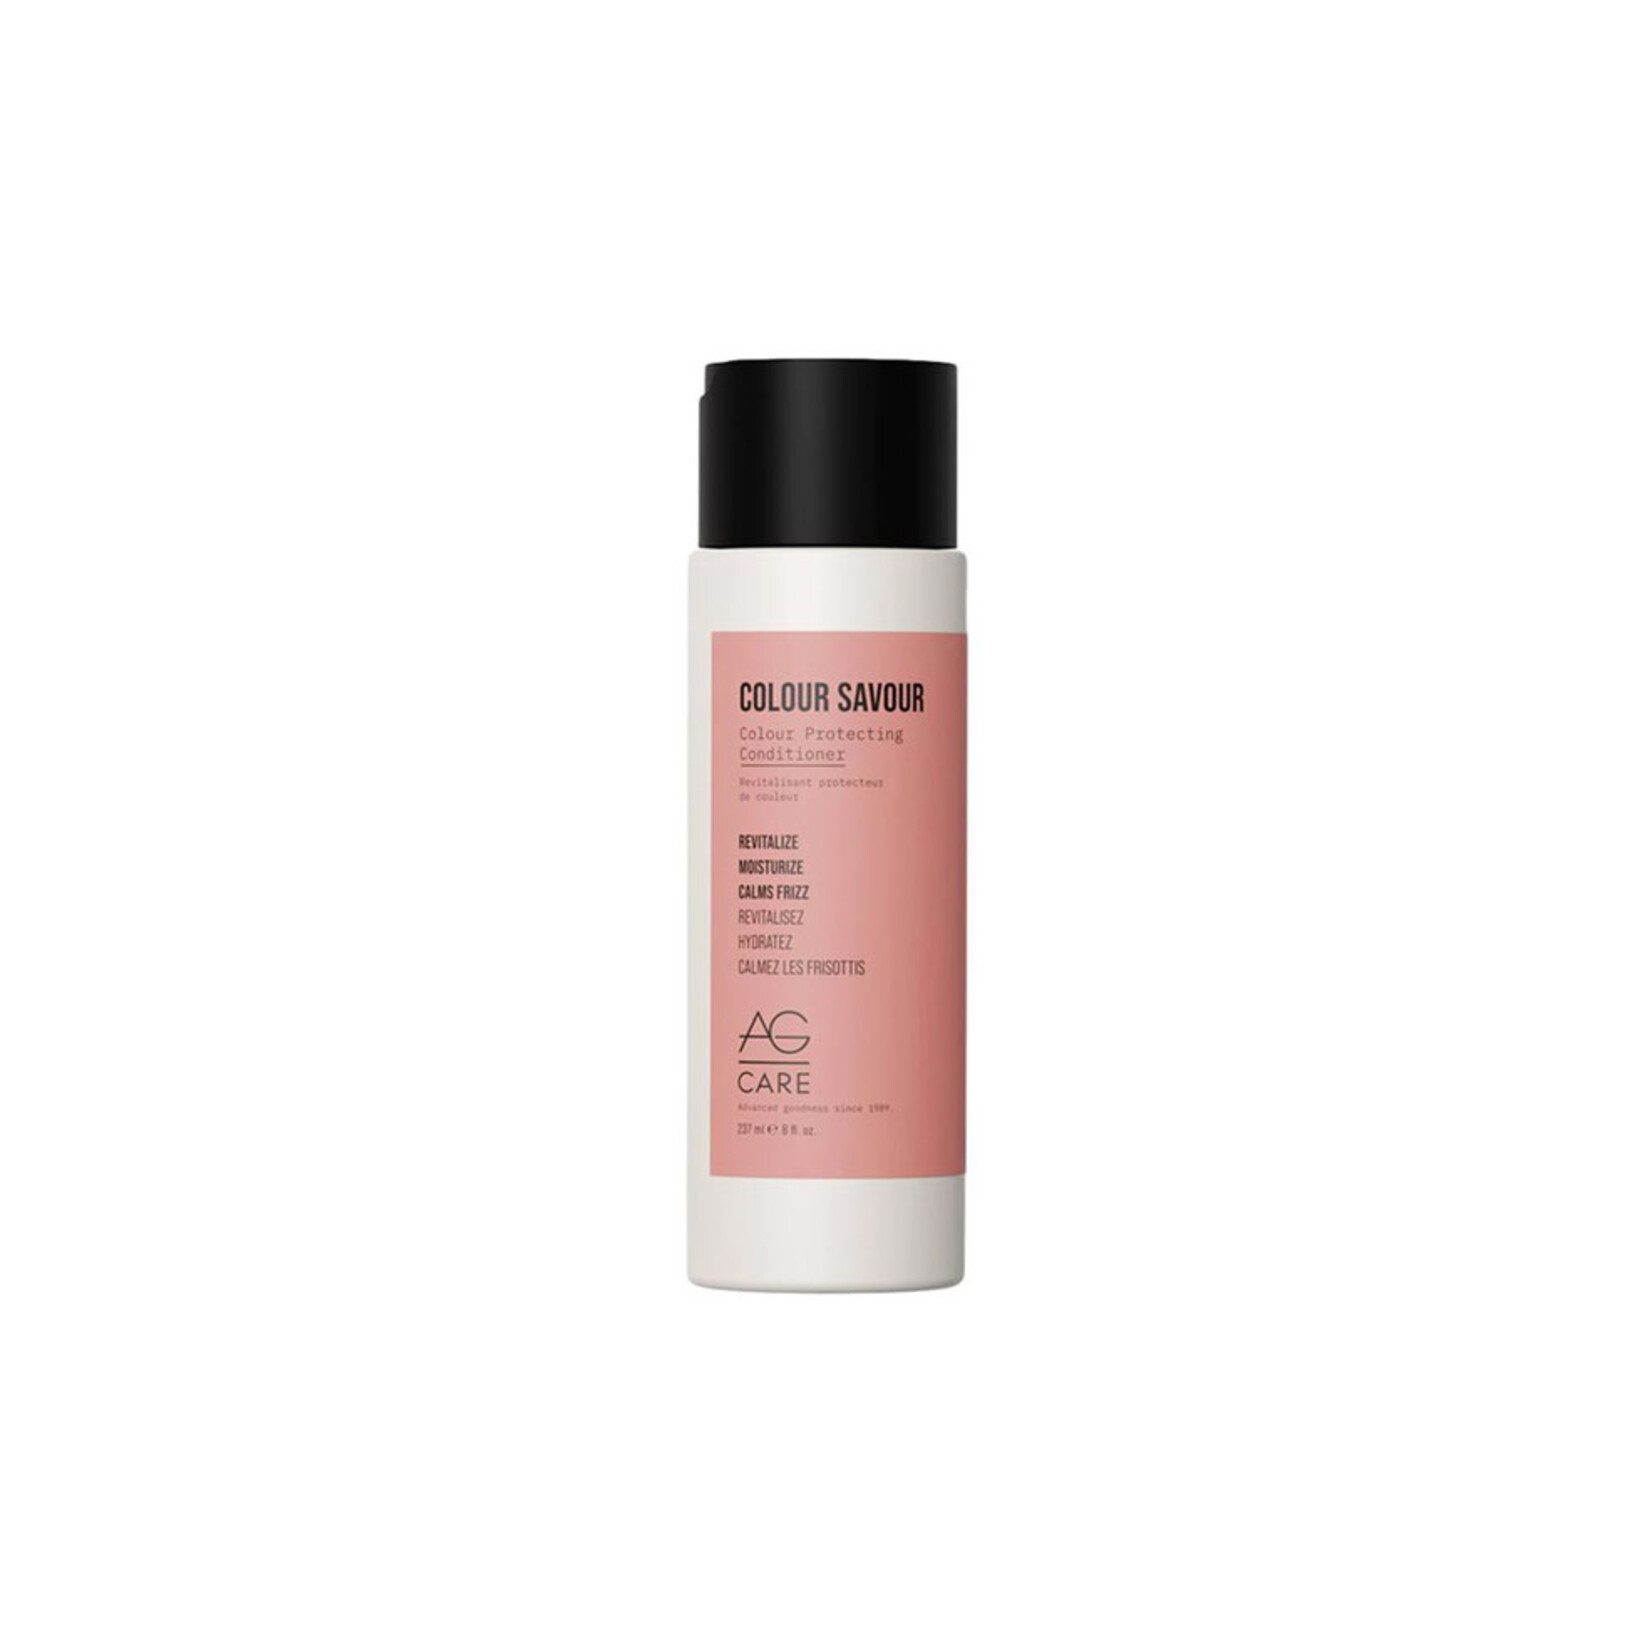 AG Hair AG - Color Care - Colour savour protection conditioner 237ml